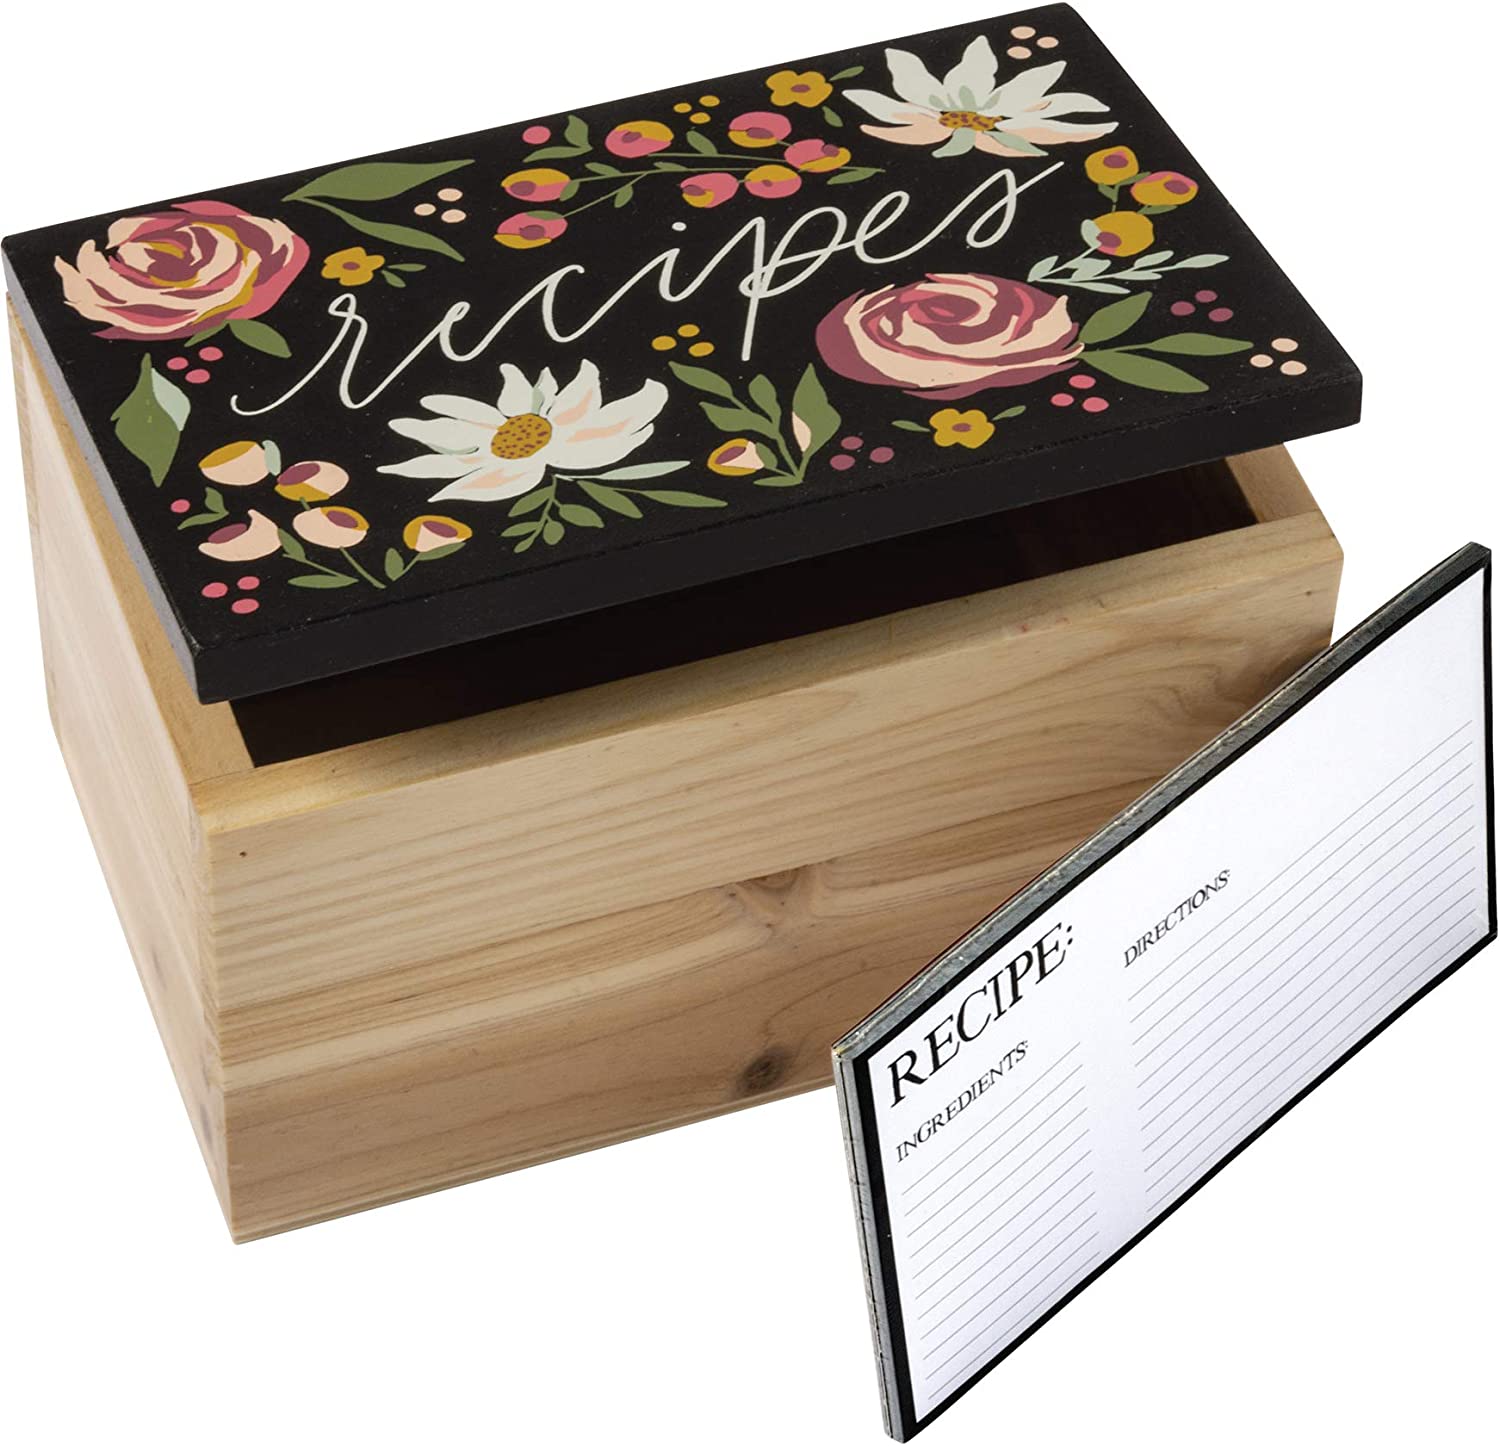 Botanical Floral Design Hinged Wooden Recipe Holder Box (Includes 30 Blank Recipe Cards)